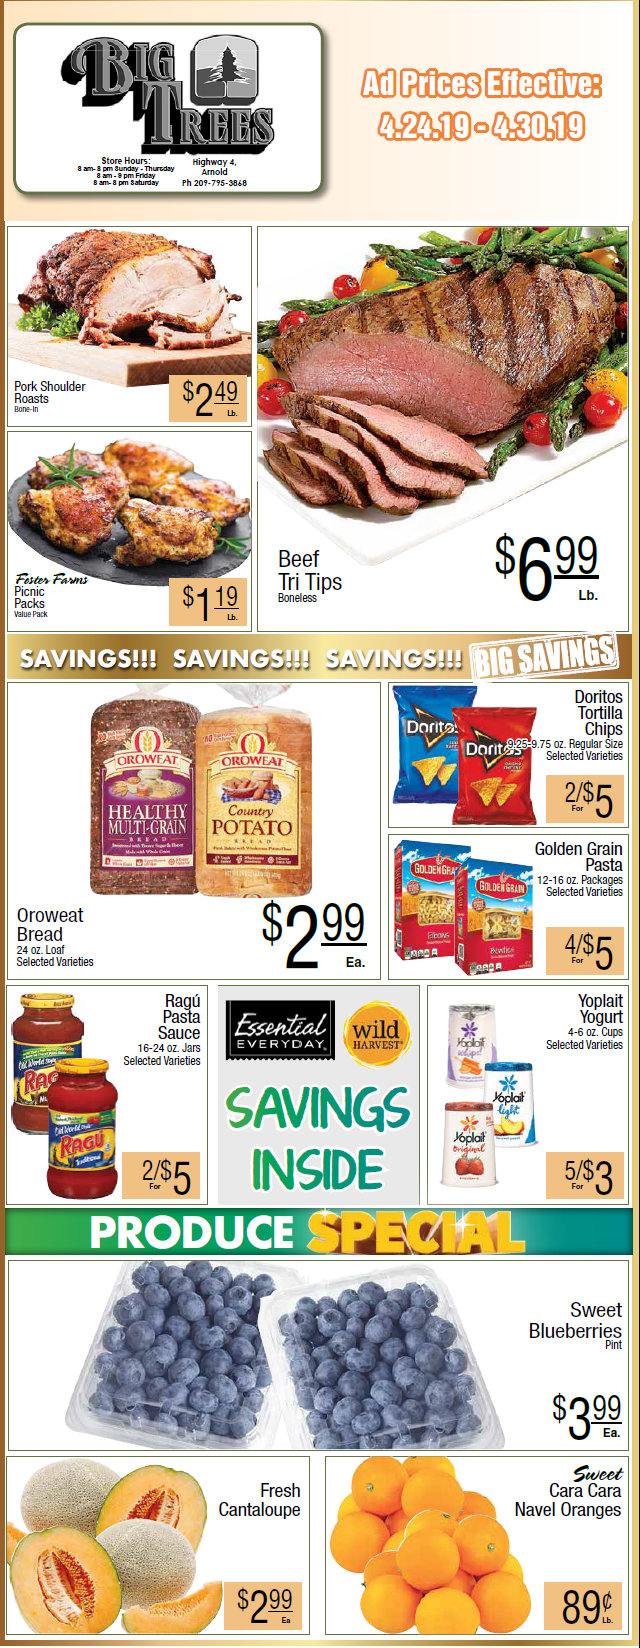 Big Trees Market Weekly Ad & Grocery Specials Through April 30th